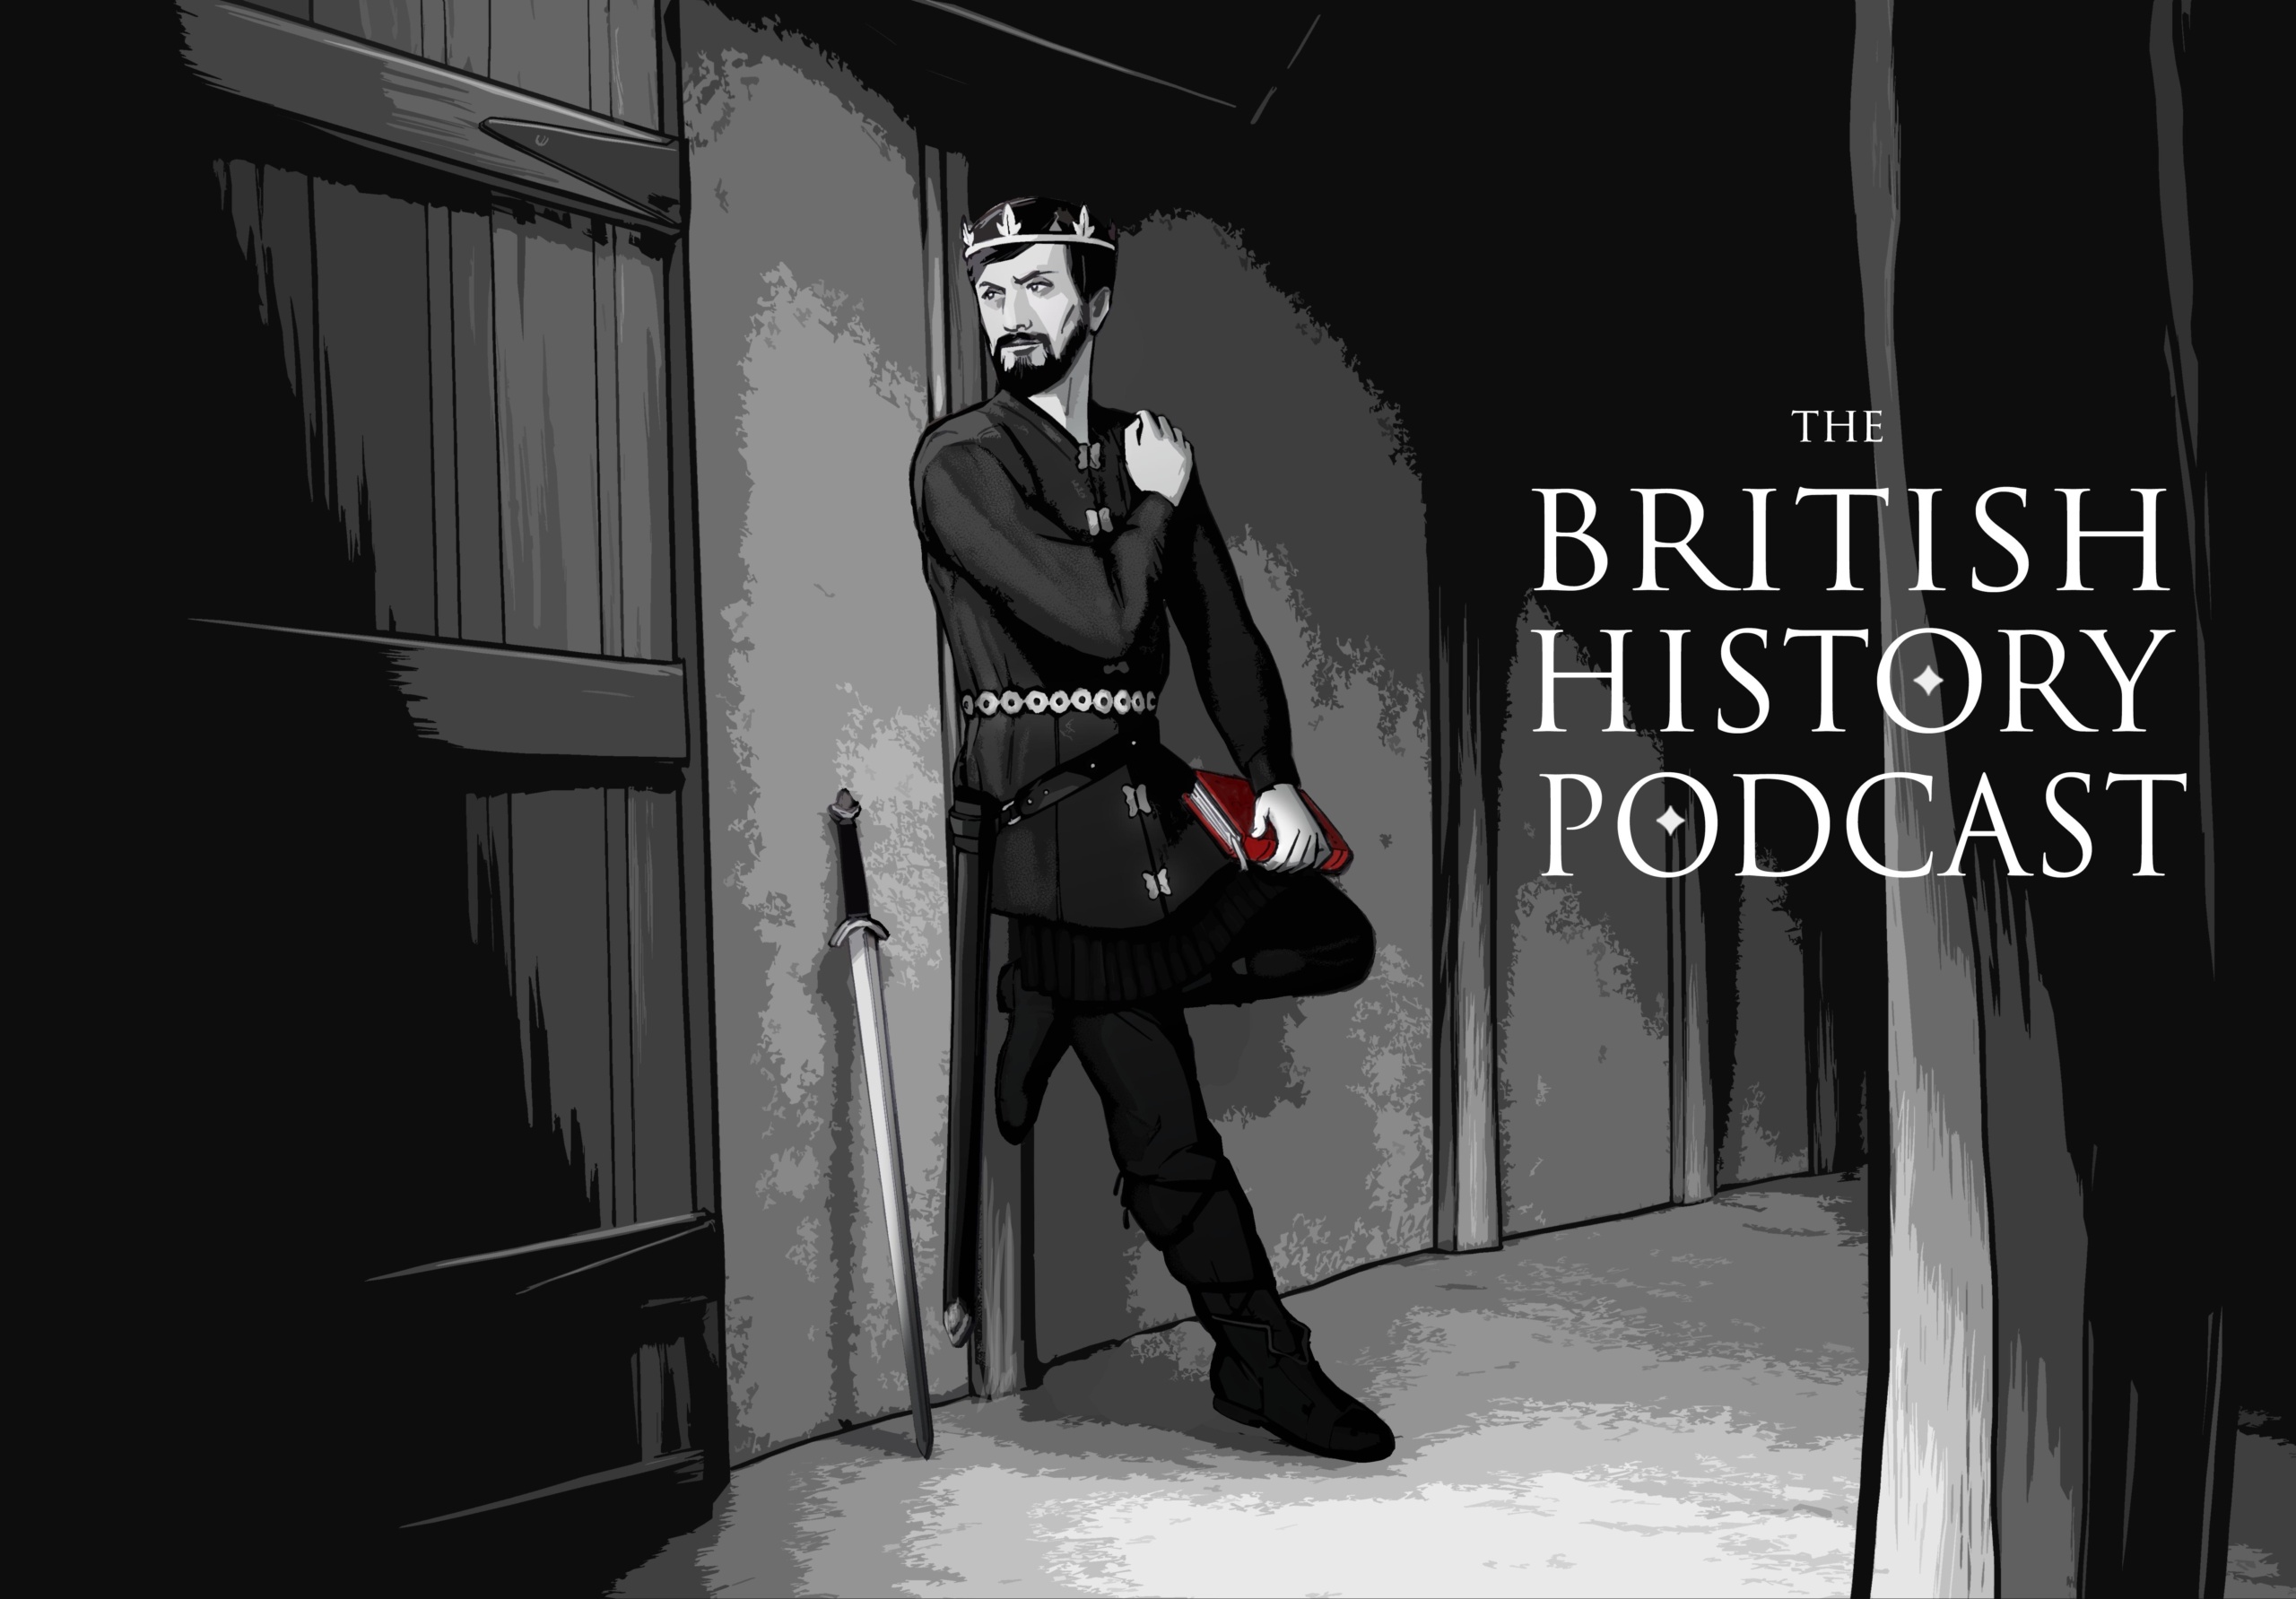 The British History Podcast - 15 Podcasts For History Buffs